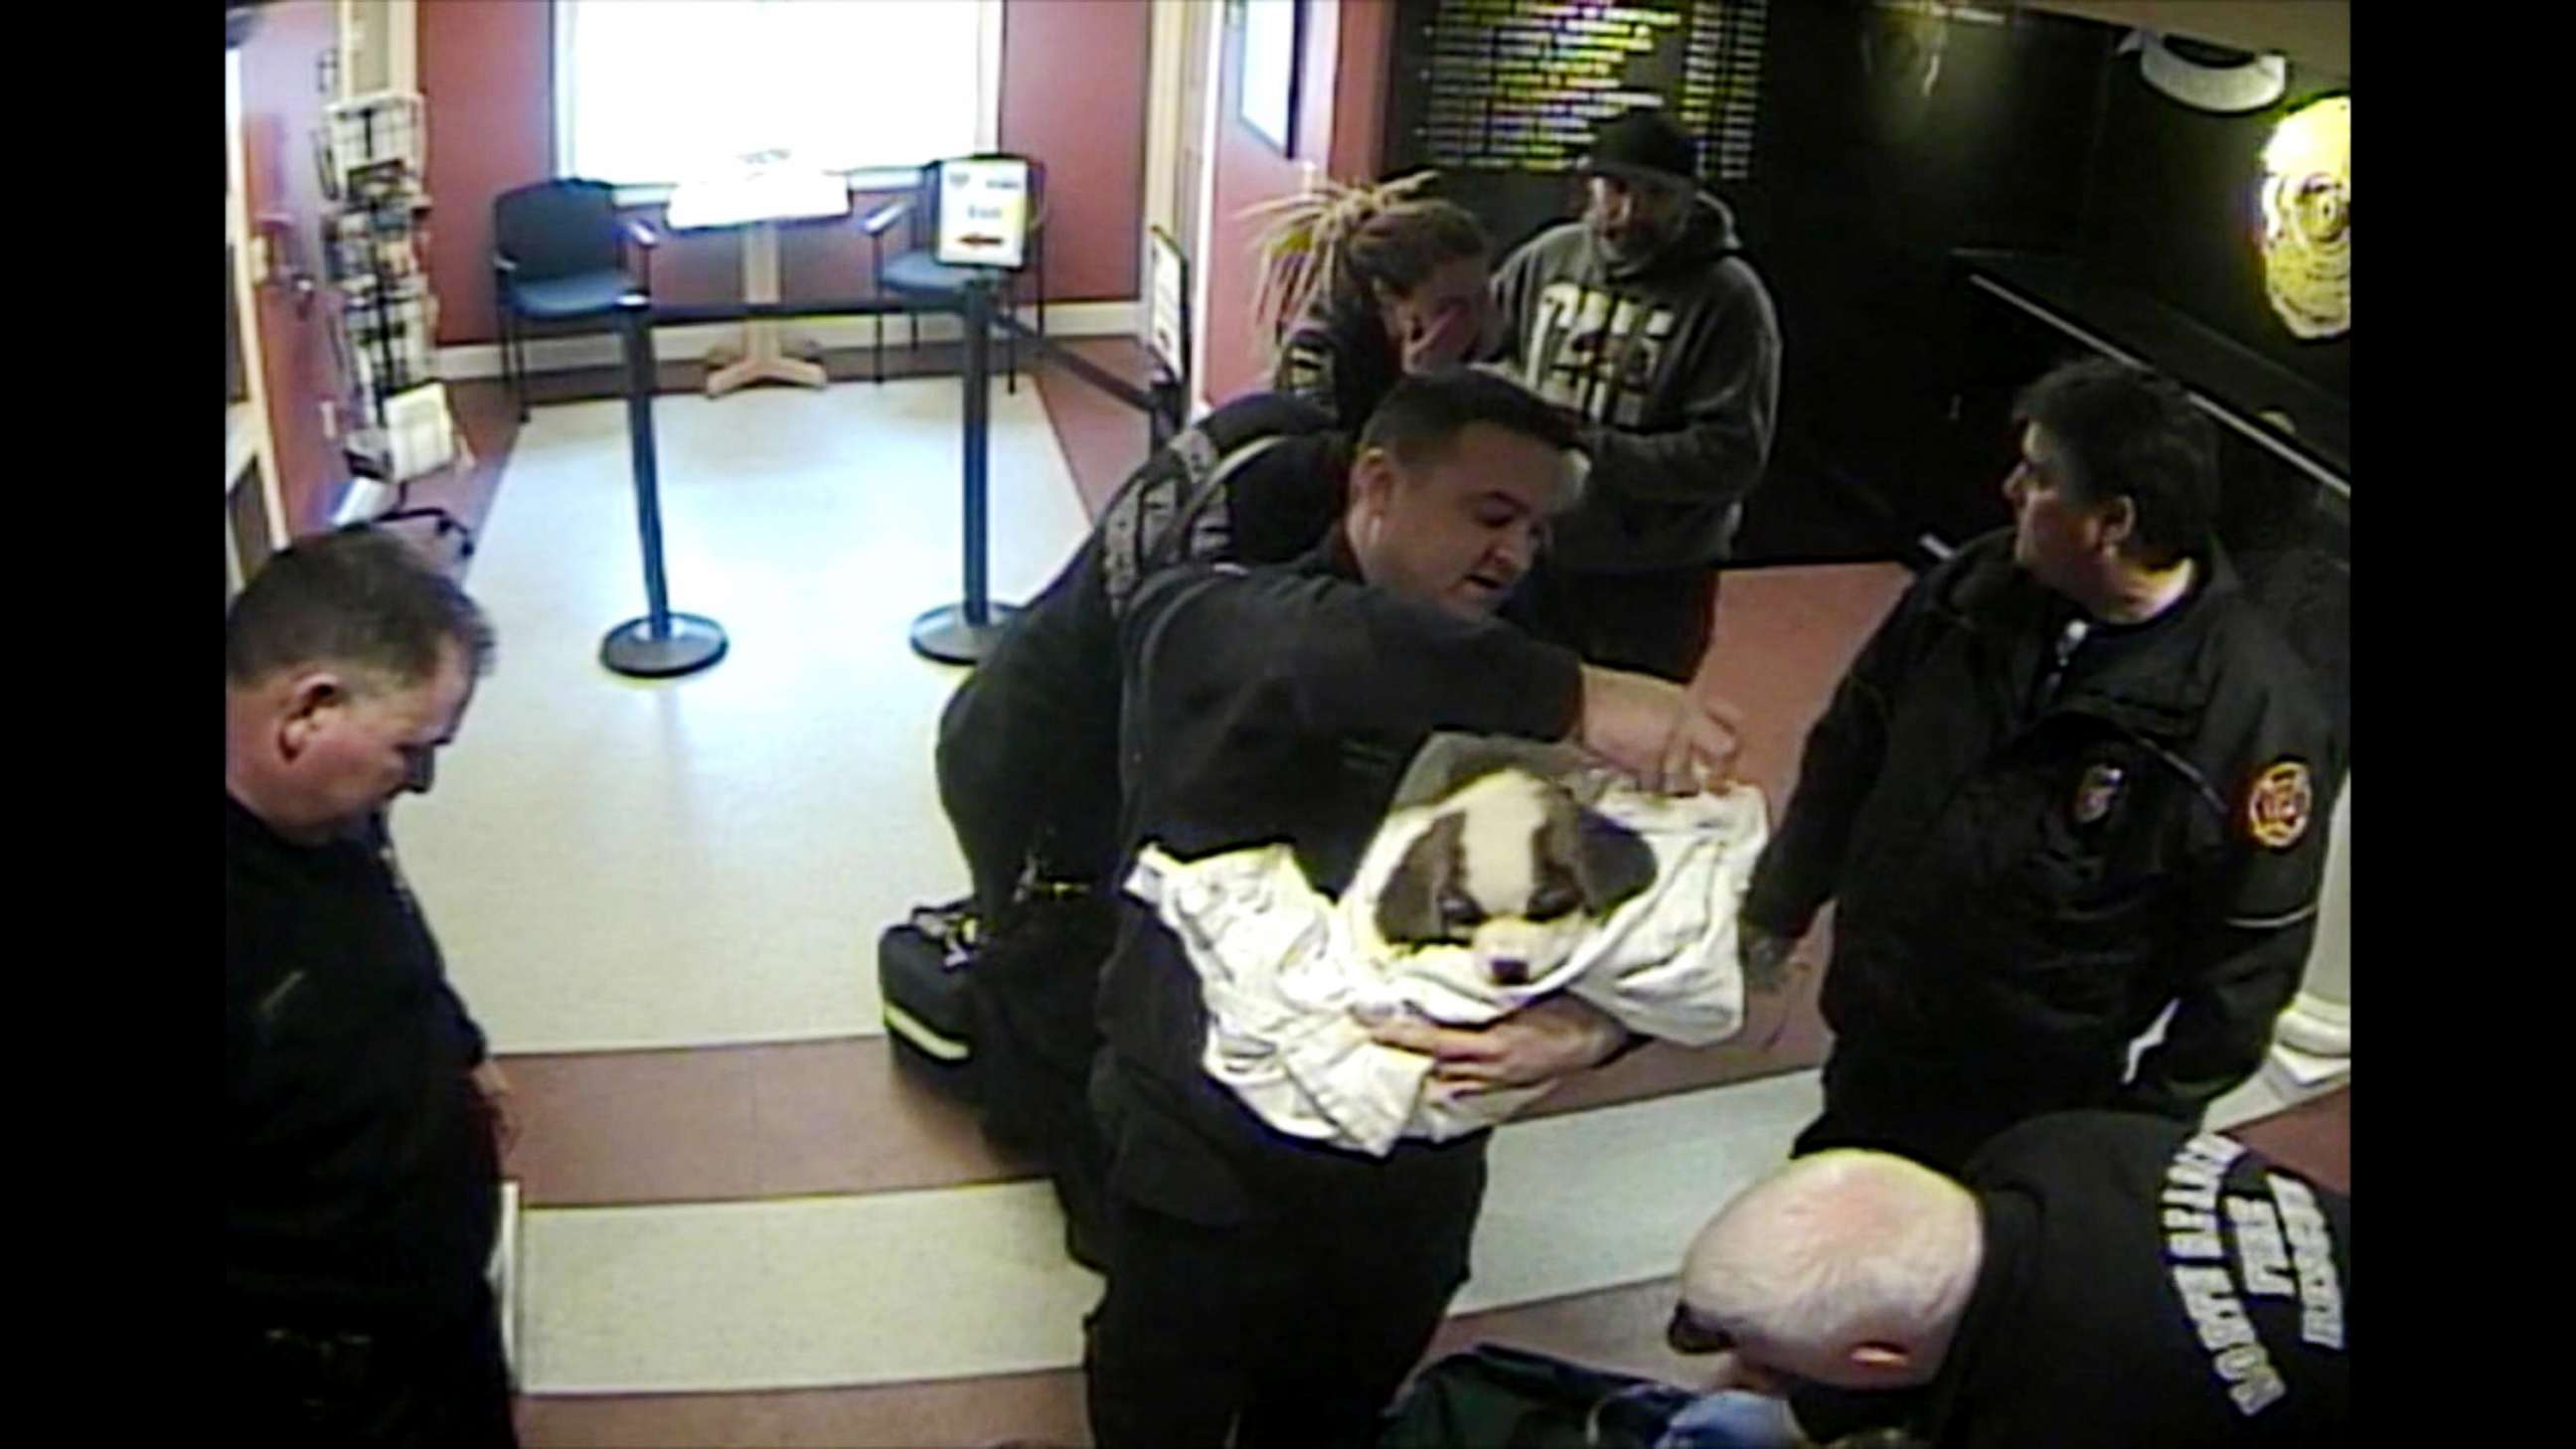 PHOTO: North Reading police officers and firefighters are captured on surveillance video saving a choking puppy.